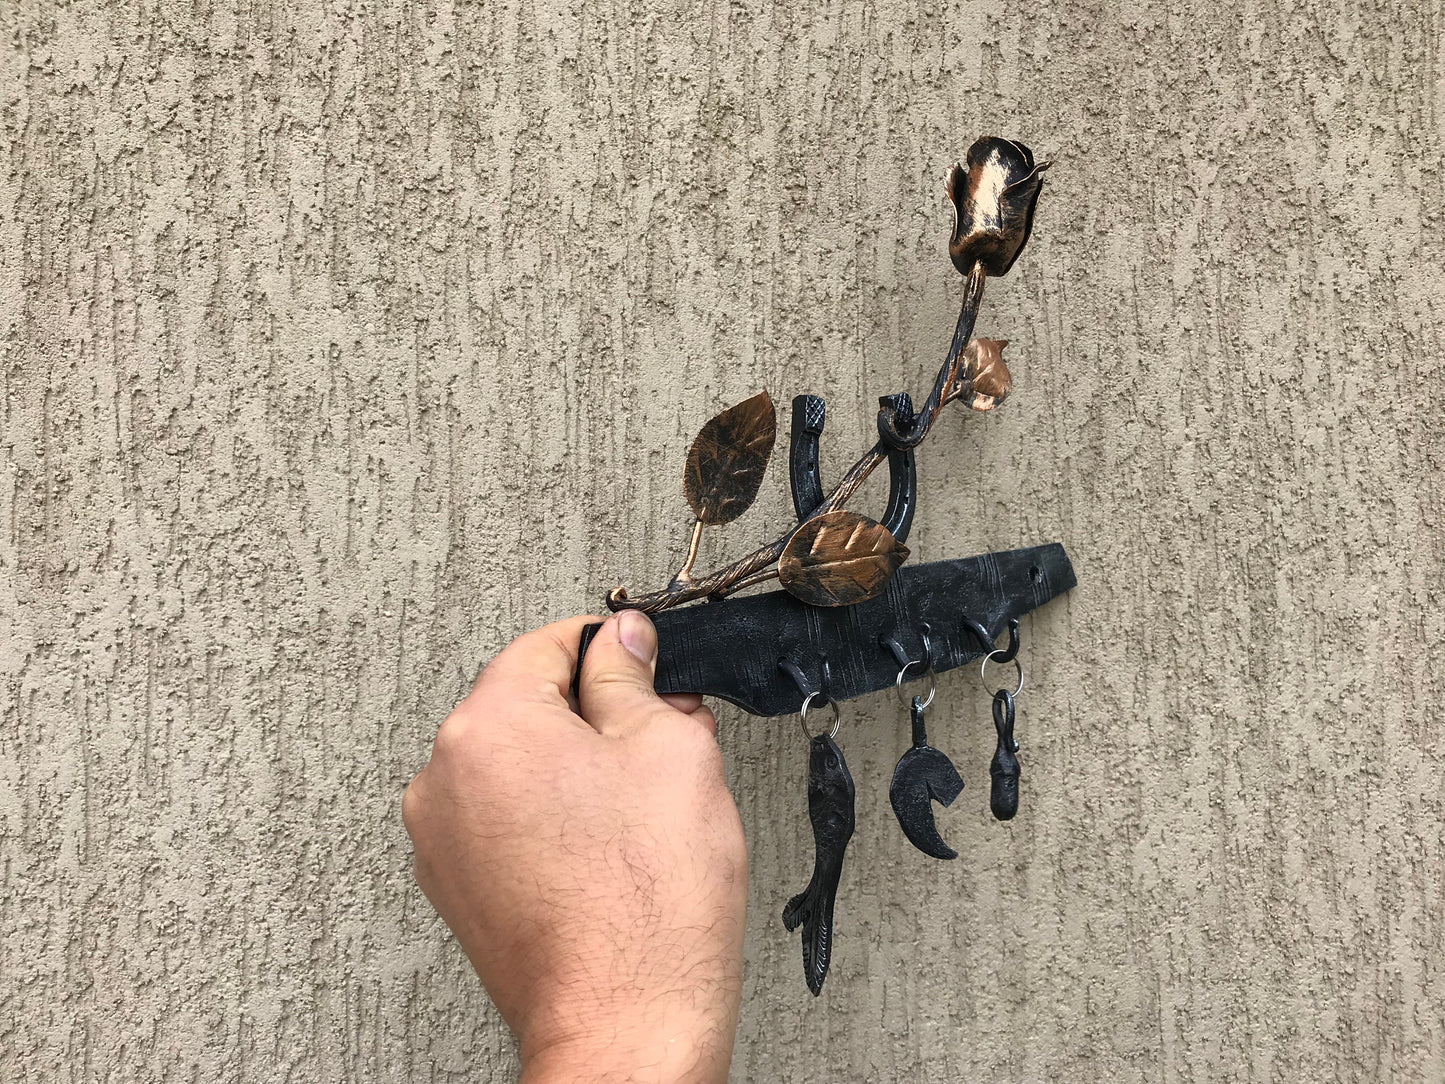 Key holder for wall, key chain, wall key holder, key holder, key rack, hallway decor, entryway decor, iron gifts, manly gift, mens gift